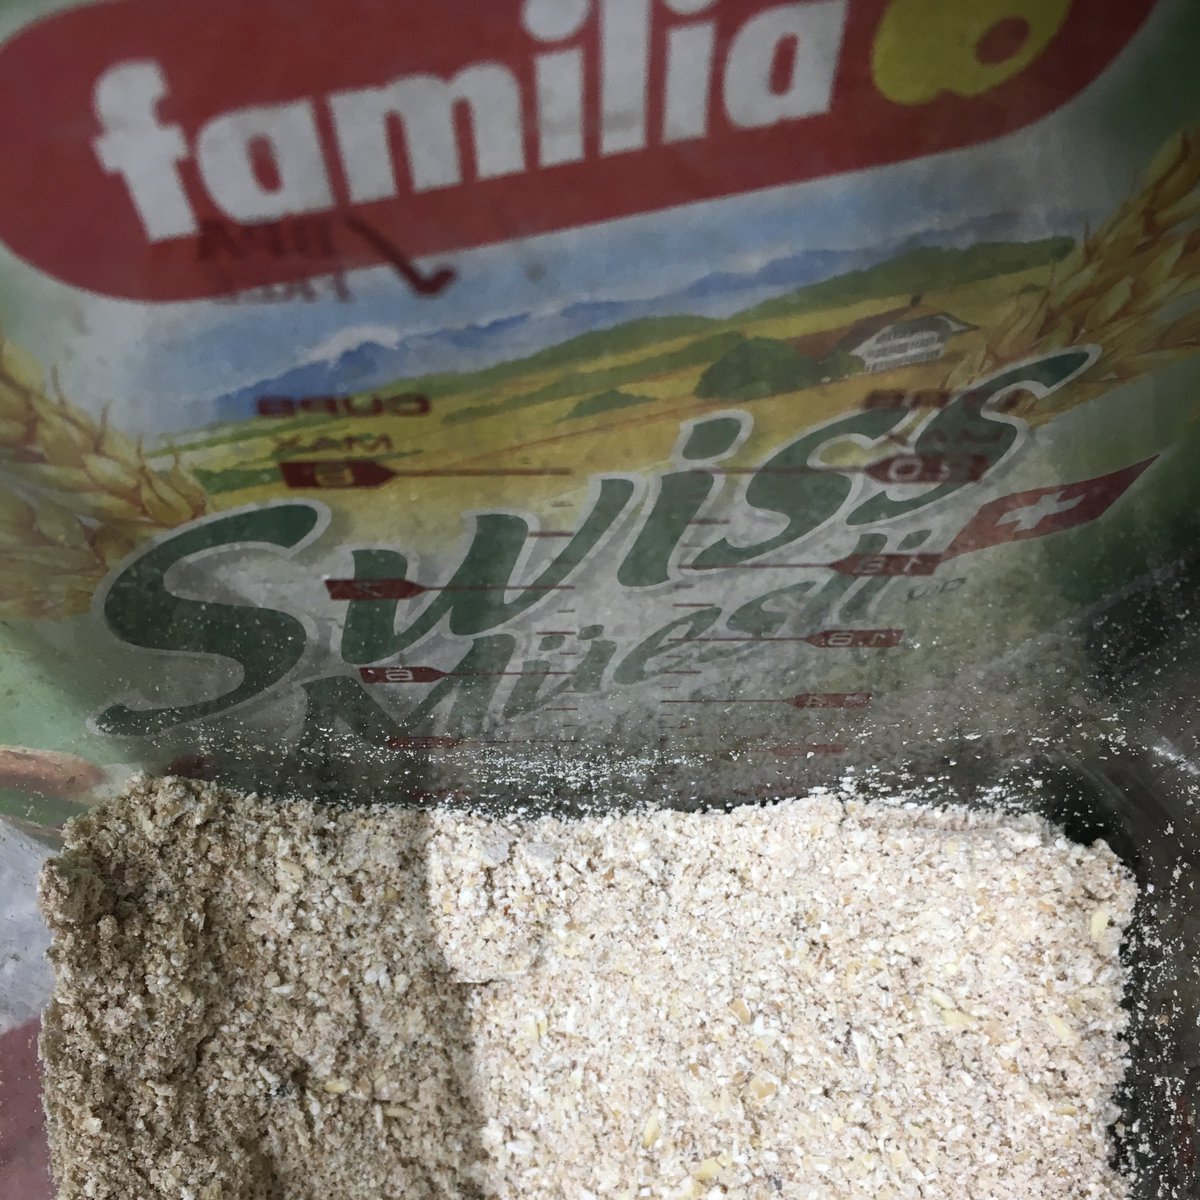 Familia Swiss Müesli fine blend to cook in hot water for instant meal, soak over night for cold breakfast, & mix with chocolate powder for energy drink